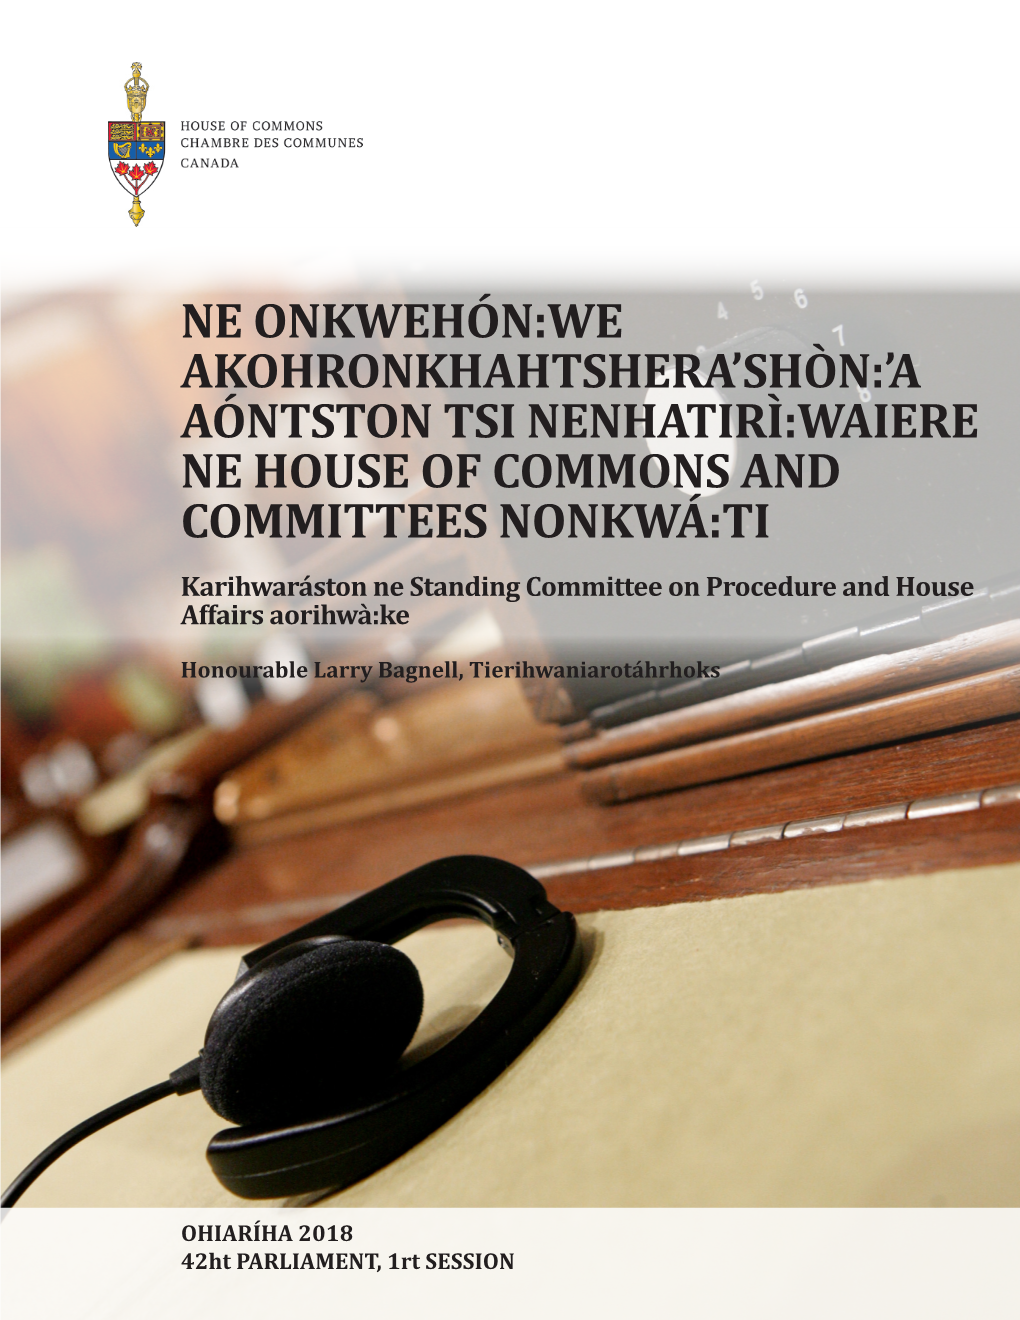 The Use of Indigenous Languages in Proceedings of the House Of